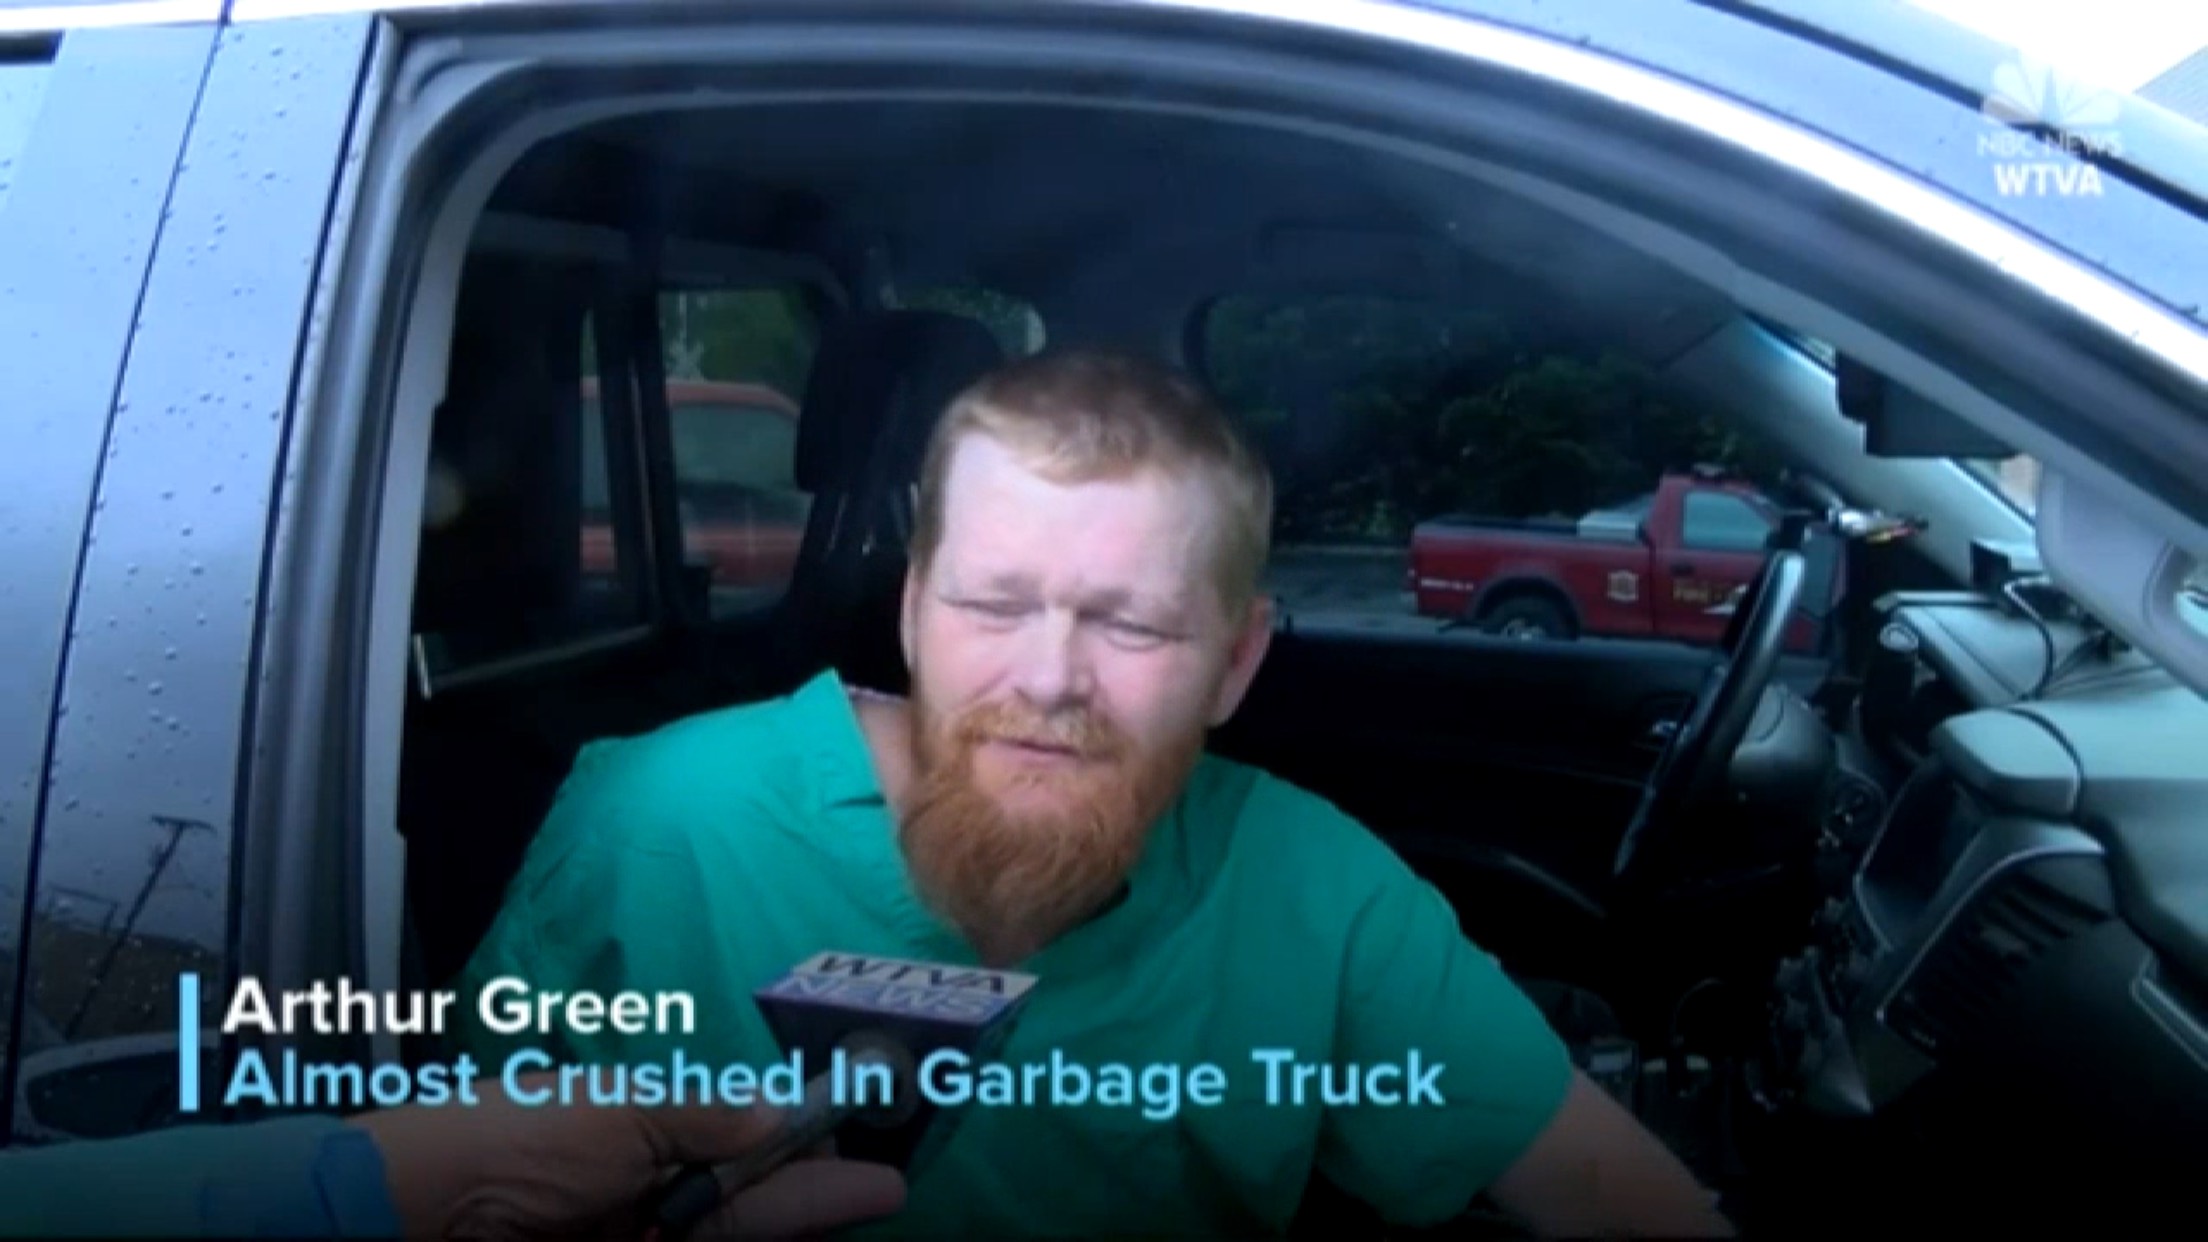 Arthur Green: Almost Crushed In Garbage Truck